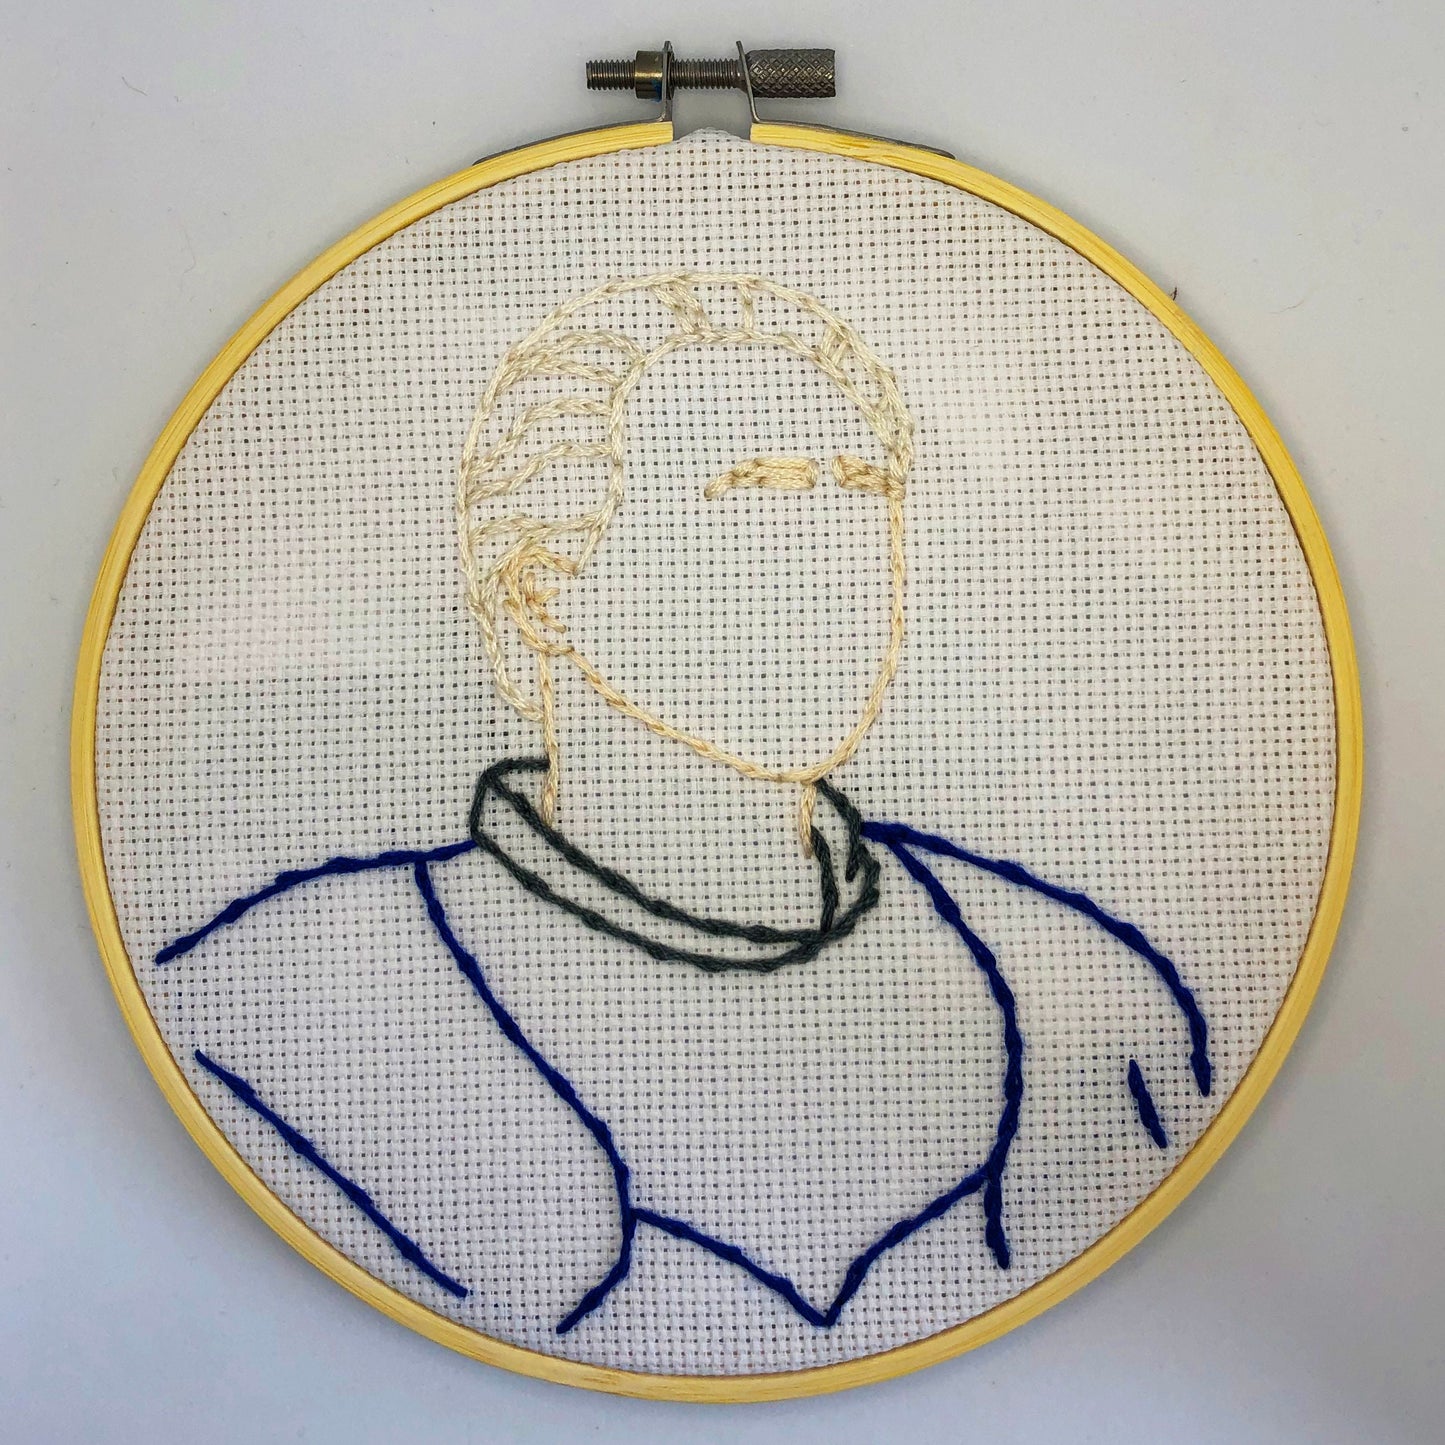 Game of Thrones embroidery